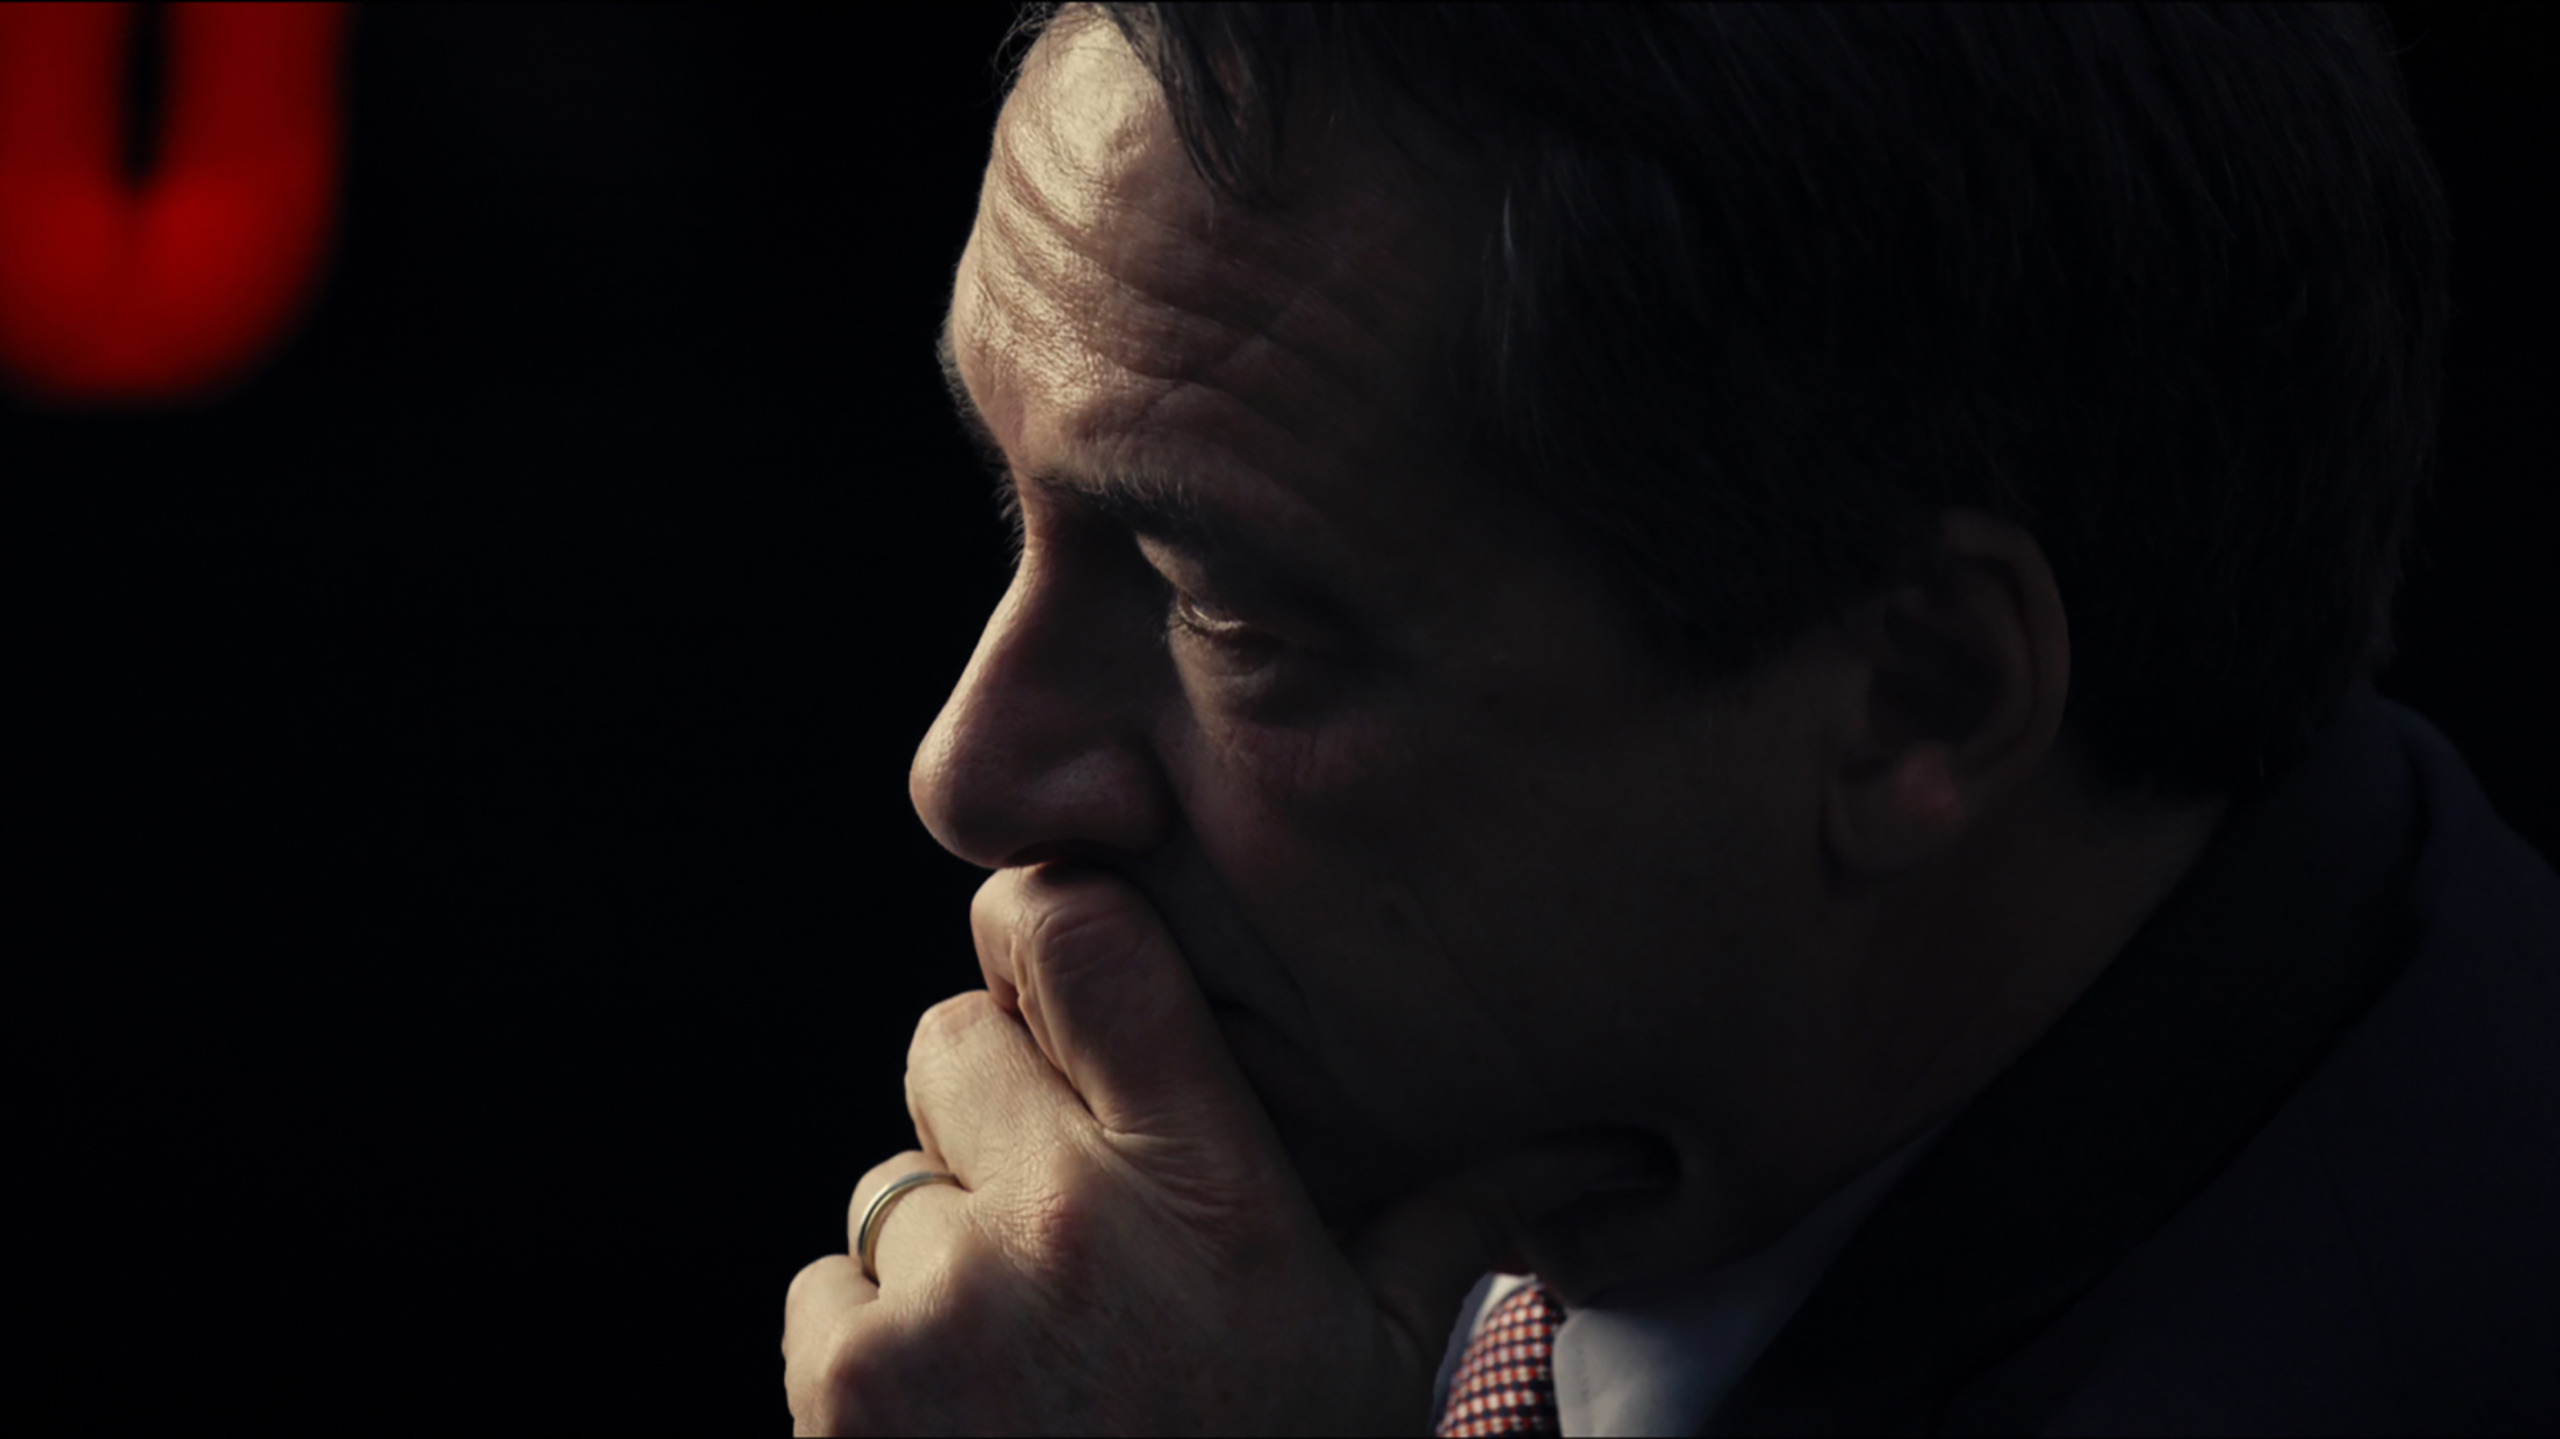 Governor Steve Bullock appears in War Game by Jesse Moss and Tony Gerber, an official selection of the Special Screenings program at the 2024 Sundance Film Festival.